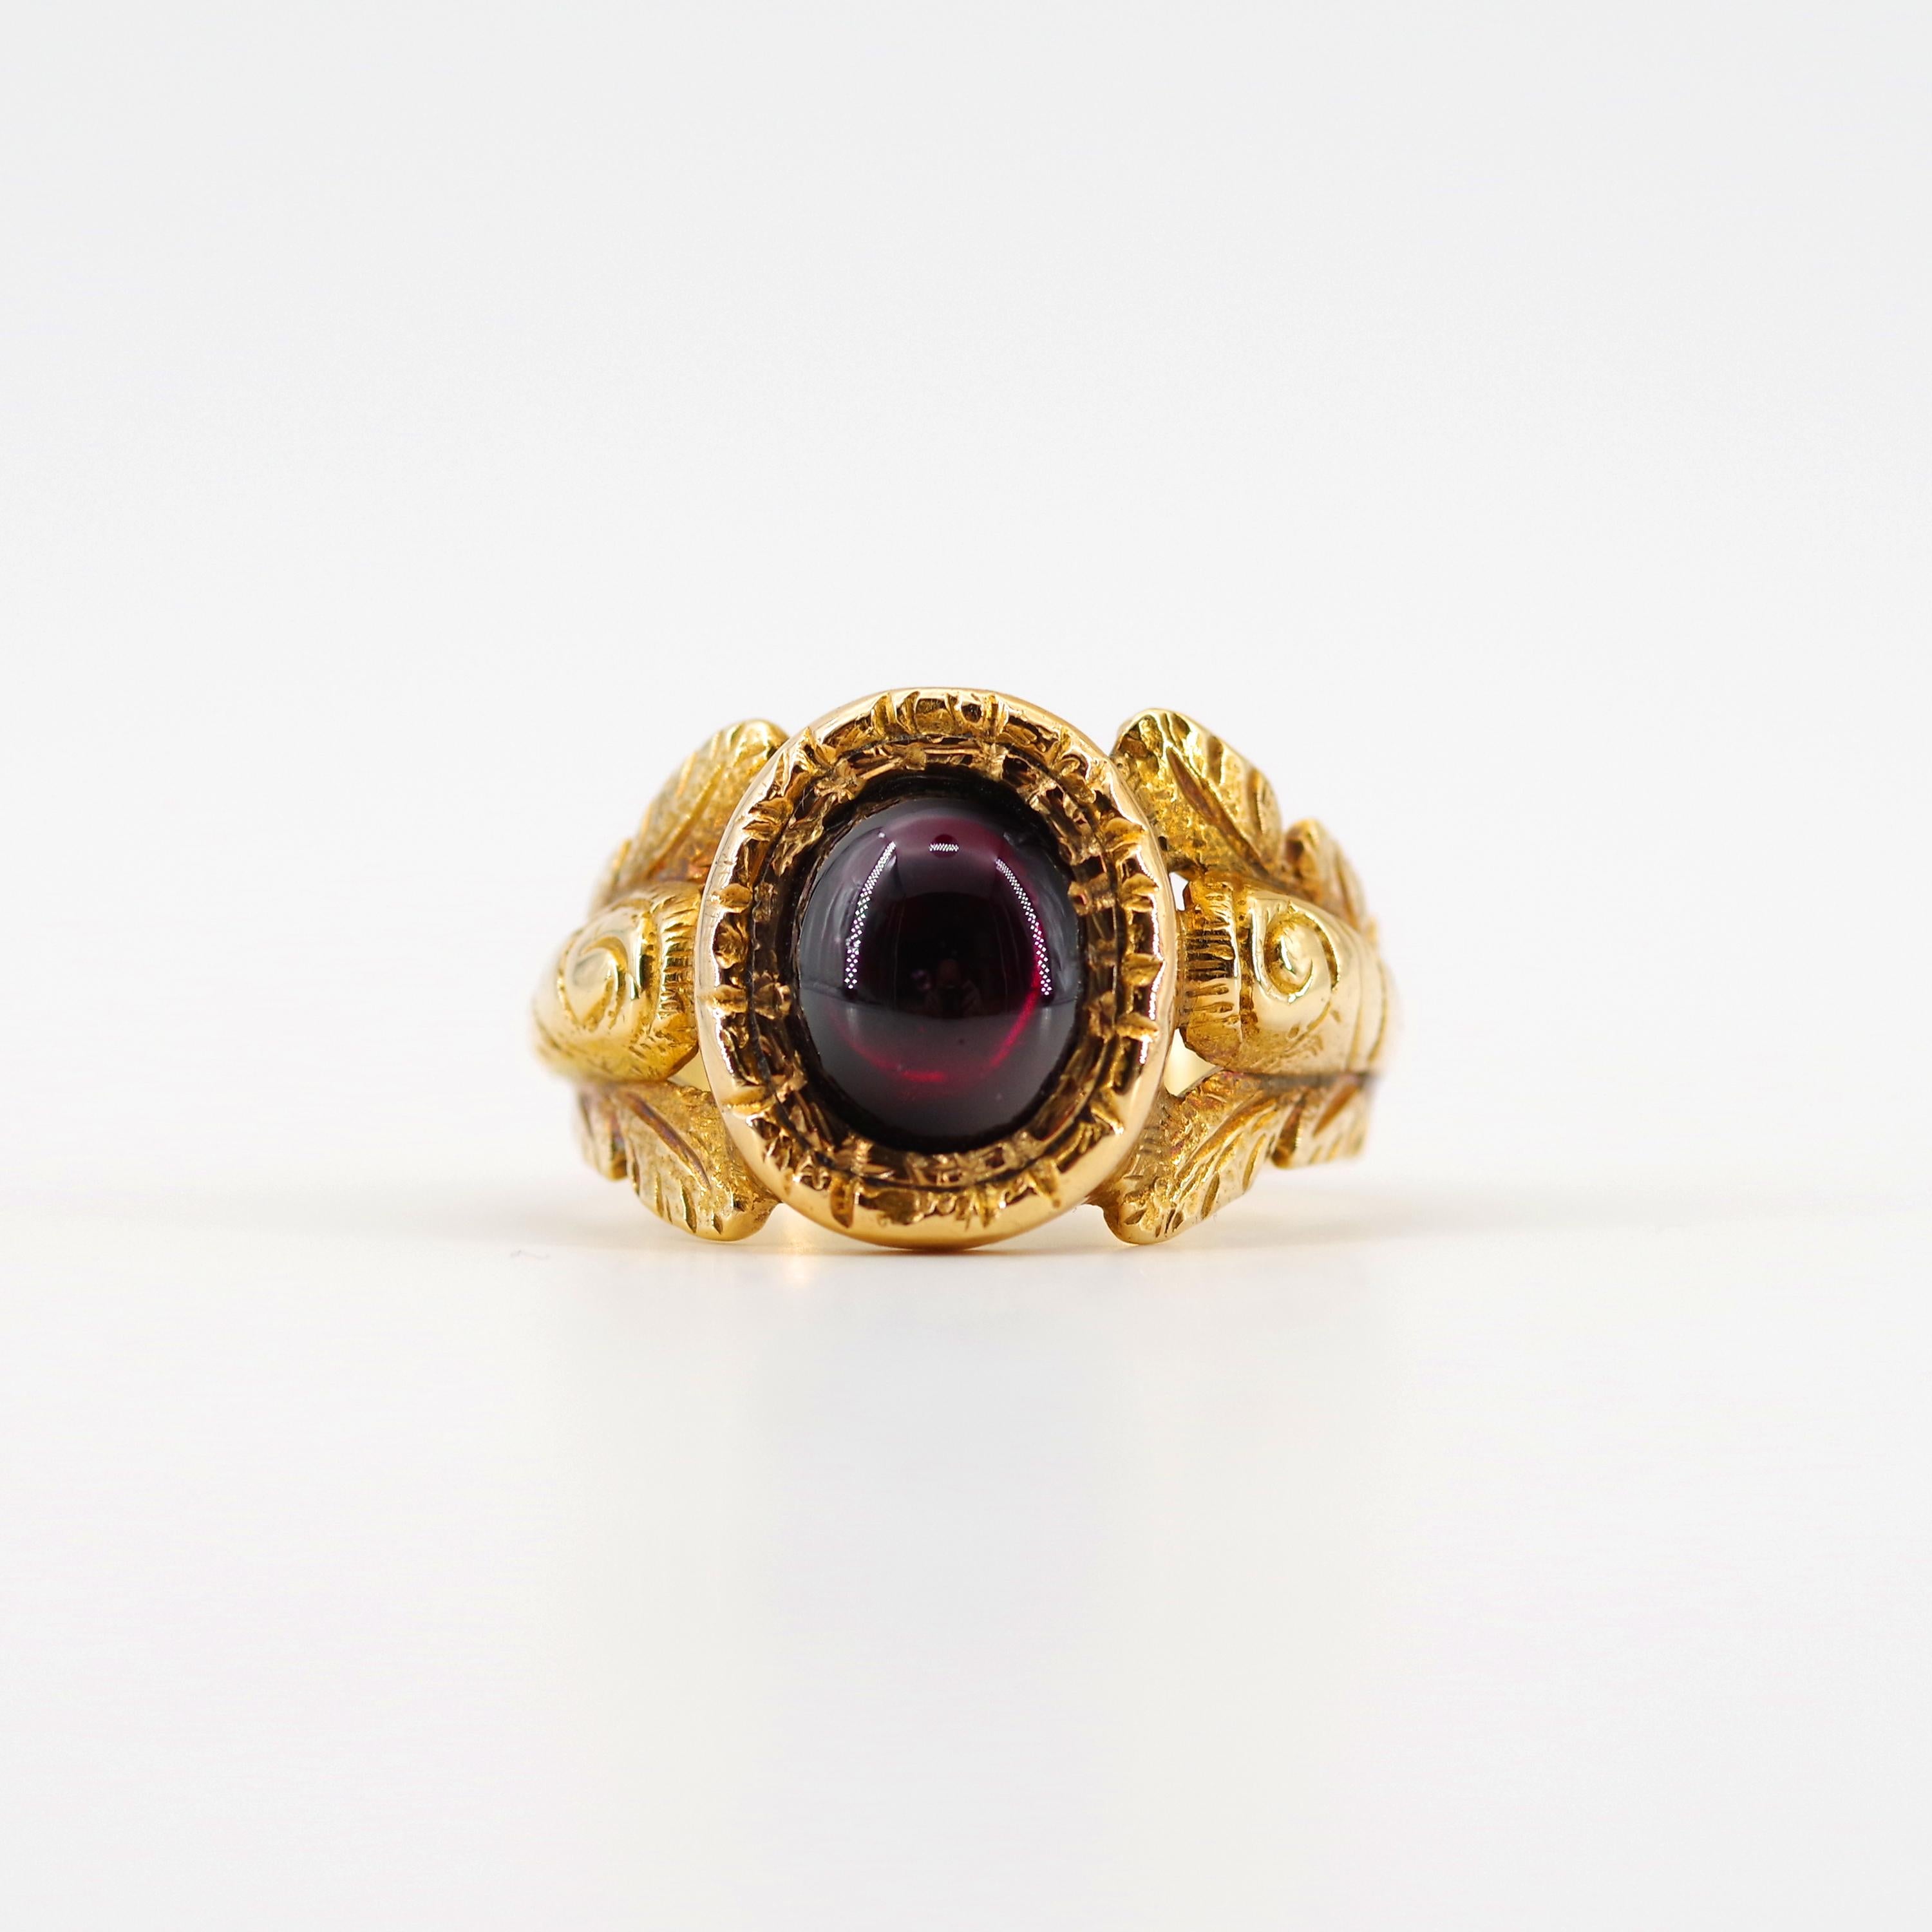 Men's Georgian Garnet Ring from France with Deeply Carved and Engraved Shoulders 1